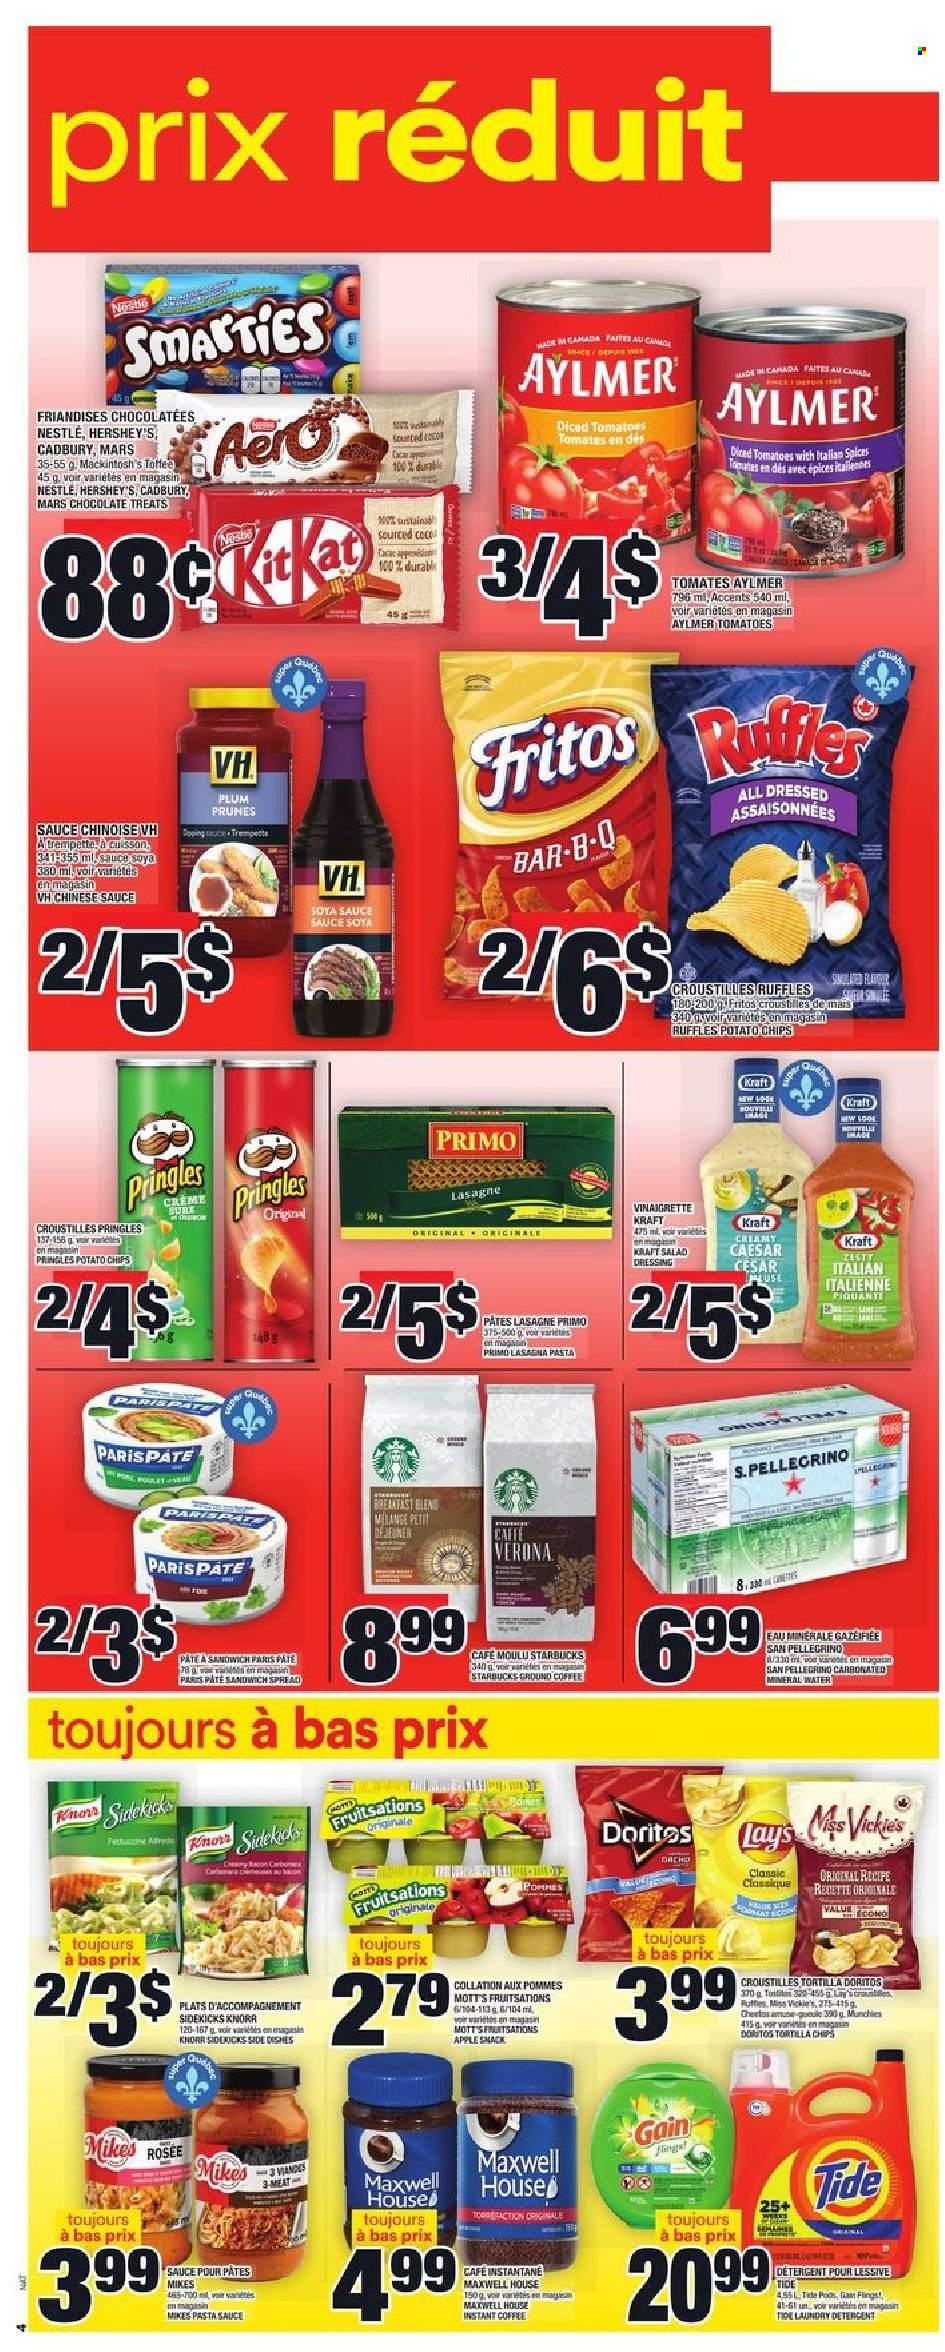 thumbnail - Super C Flyer - October 14, 2021 - October 20, 2021 - Sales products - tomatoes, Mott's, pasta sauce, sauce, lasagna meal, Kraft®, Hershey's, chocolate, Mars, Cadbury, Doritos, Fritos, tortilla chips, potato chips, Pringles, Cheetos, Lay’s, Ruffles, salad dressing, soy sauce, vinaigrette dressing, dressing, prunes, dried fruit, mineral water, San Pellegrino, Maxwell House, instant coffee, Starbucks, Gain, Tide, Sure, Knorr, Nestlé, detergent, chips. Page 5.